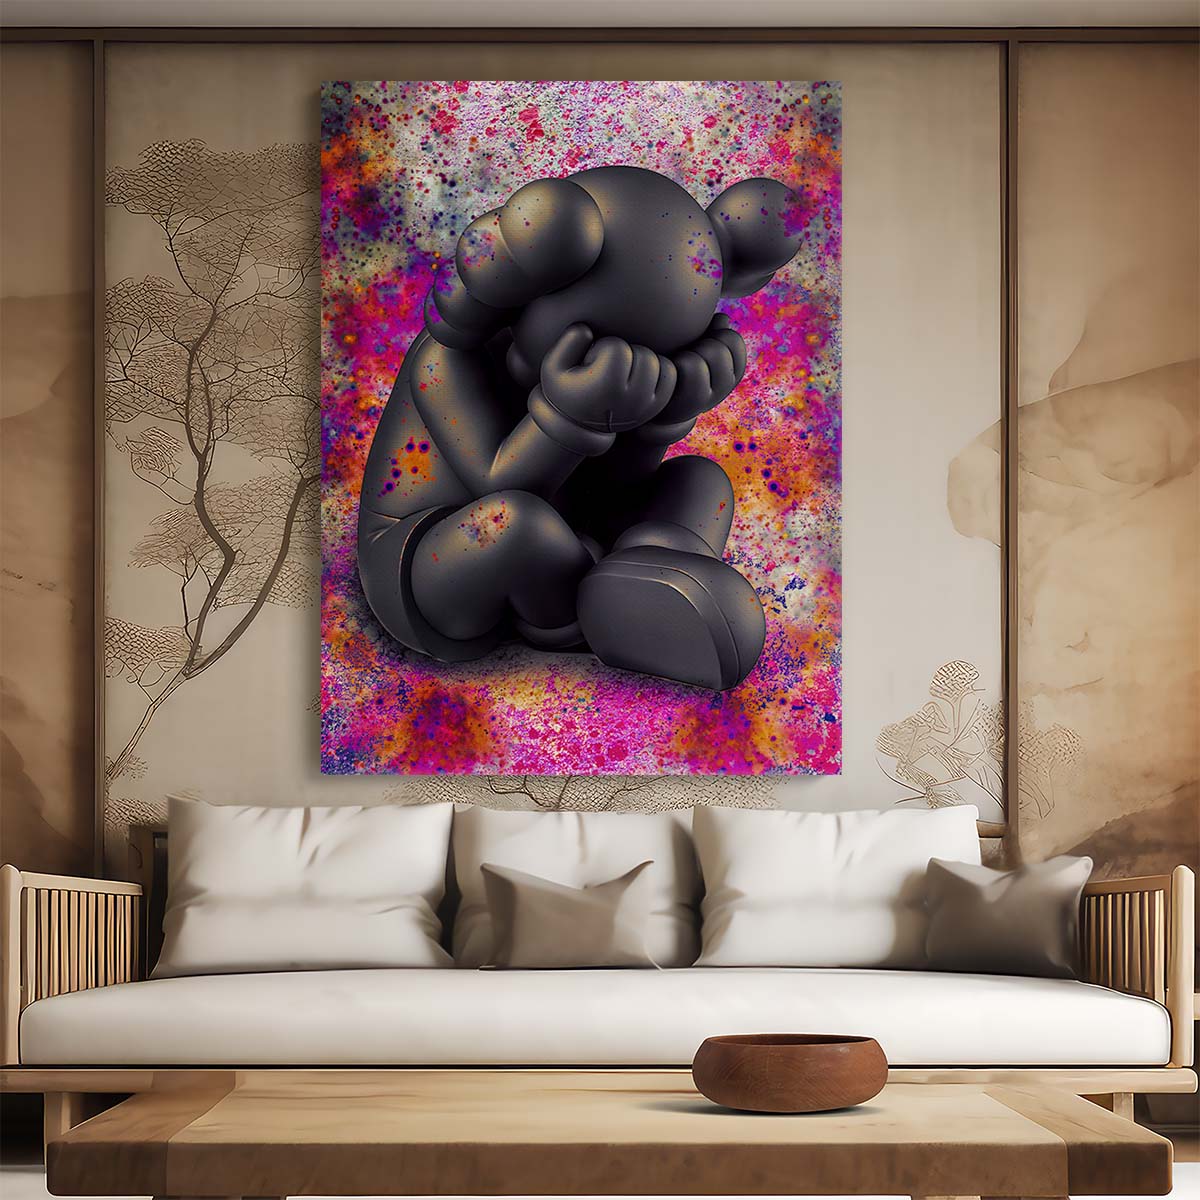 Kaws Separated Wall Art by Luxuriance Designs. Made in USA.